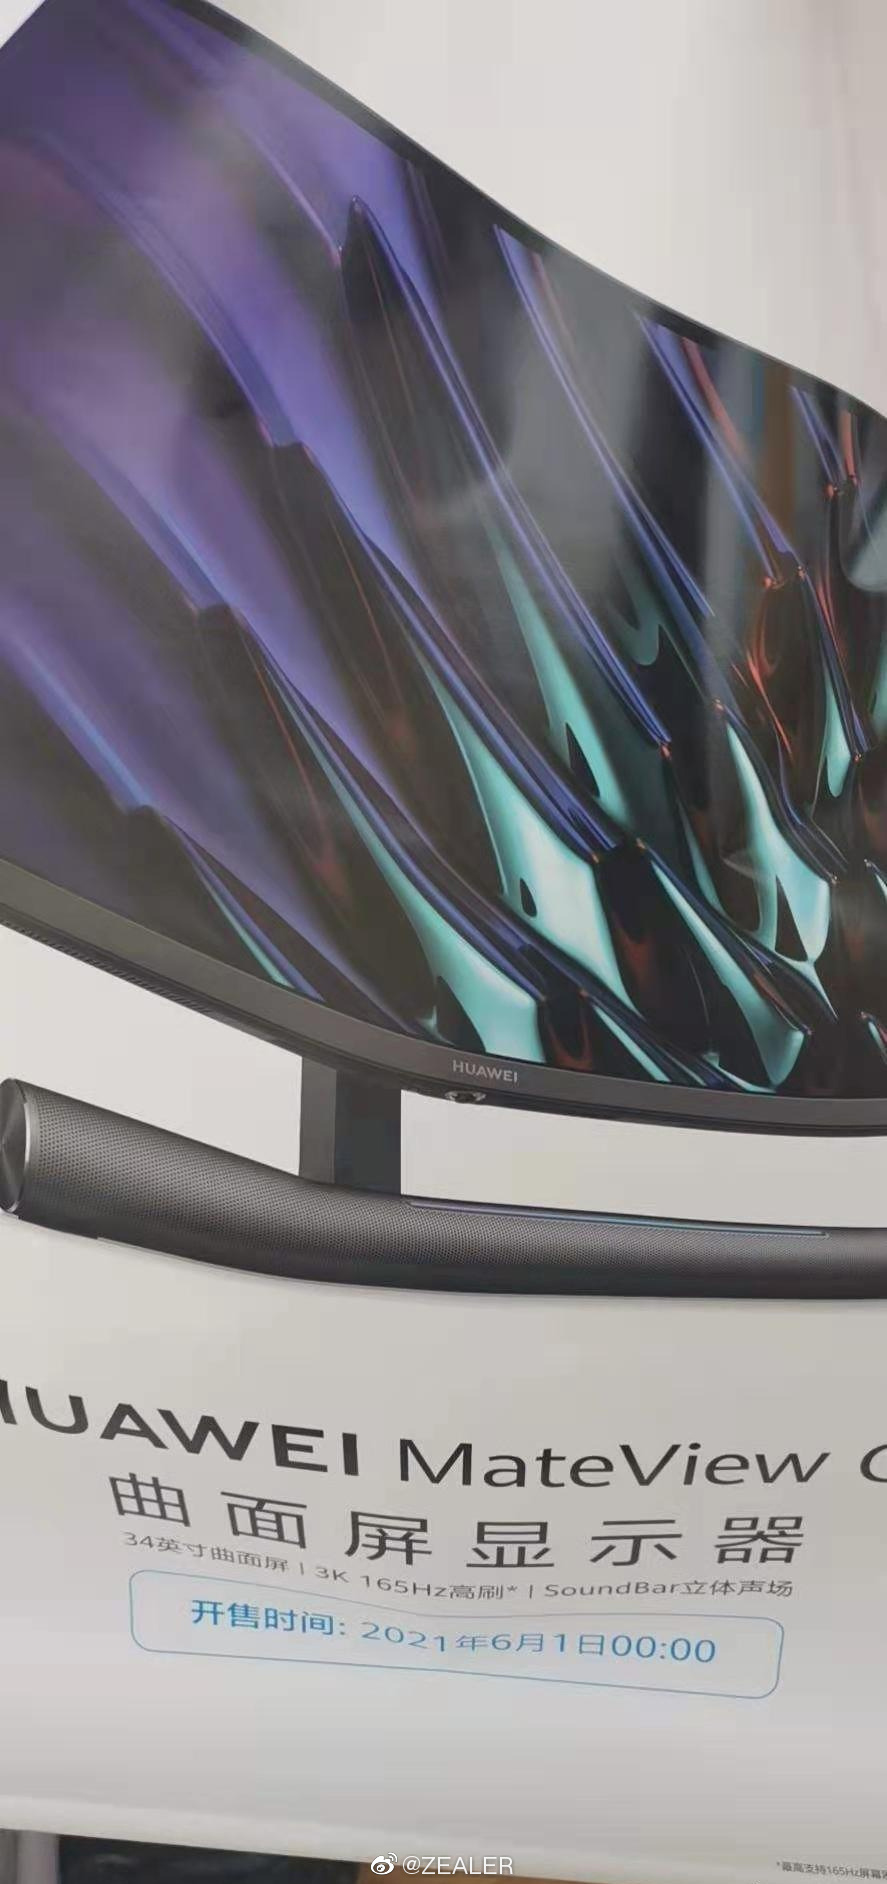 Huawei MateView 34-inch curved screen display poster leaked